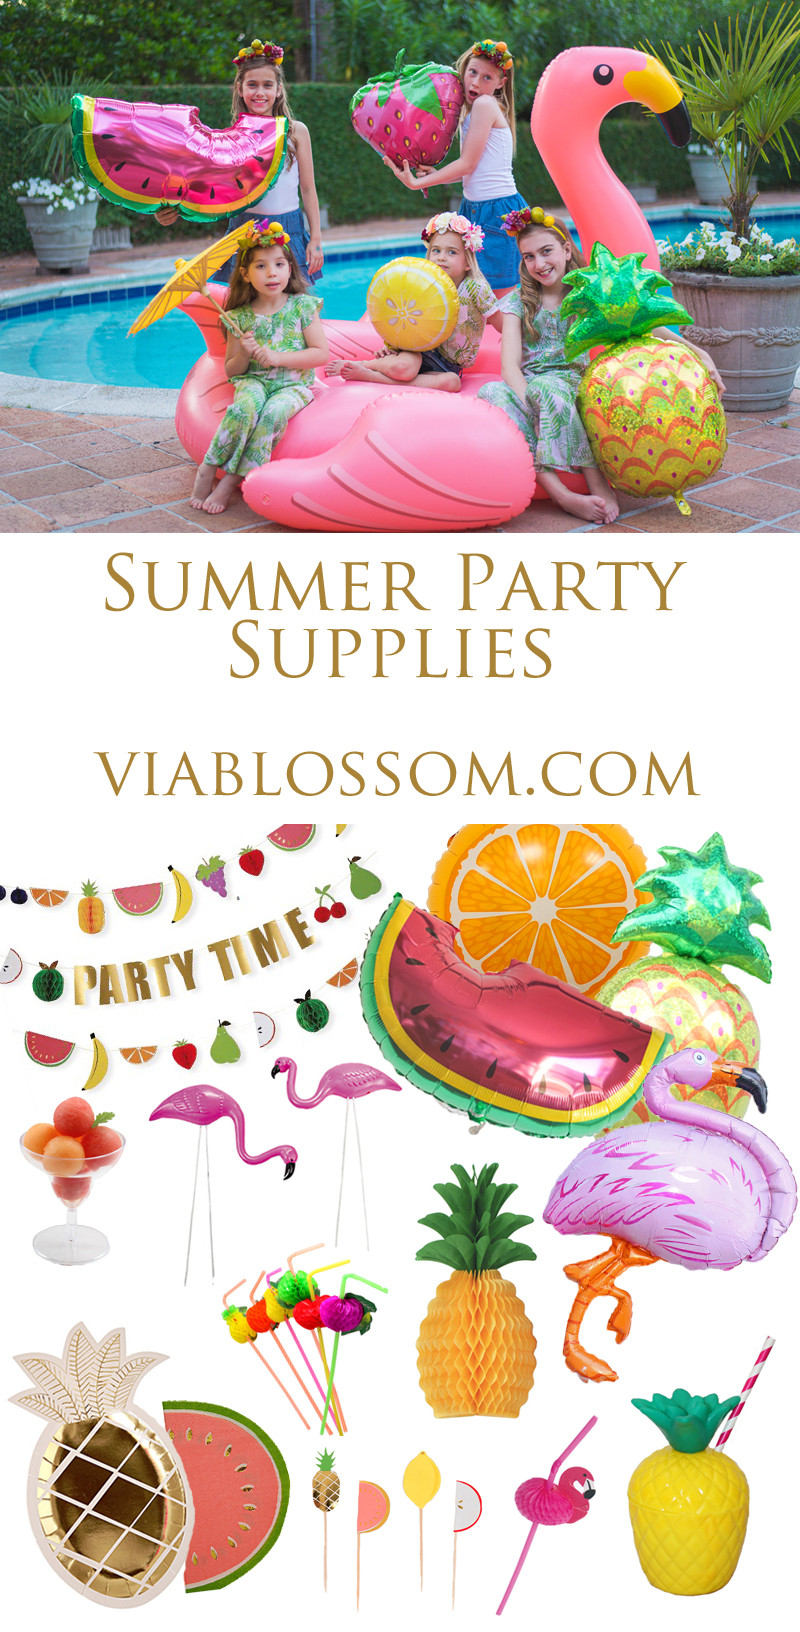 Summer Party Favor Ideas
 Must Have Summer Party Supplies Via Blossom